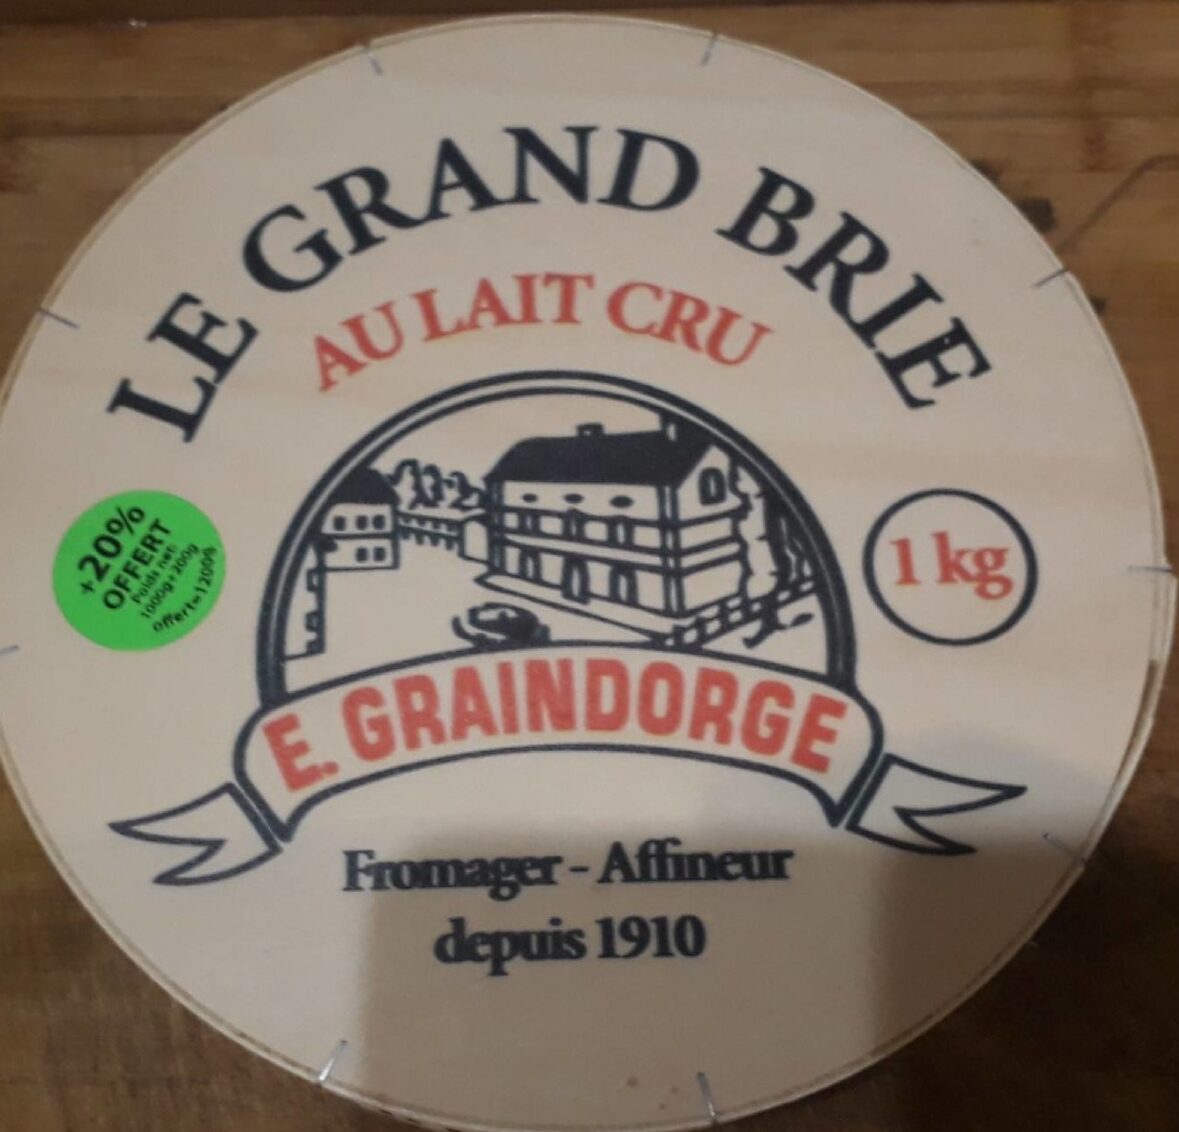 Le grand brie - Product - fr